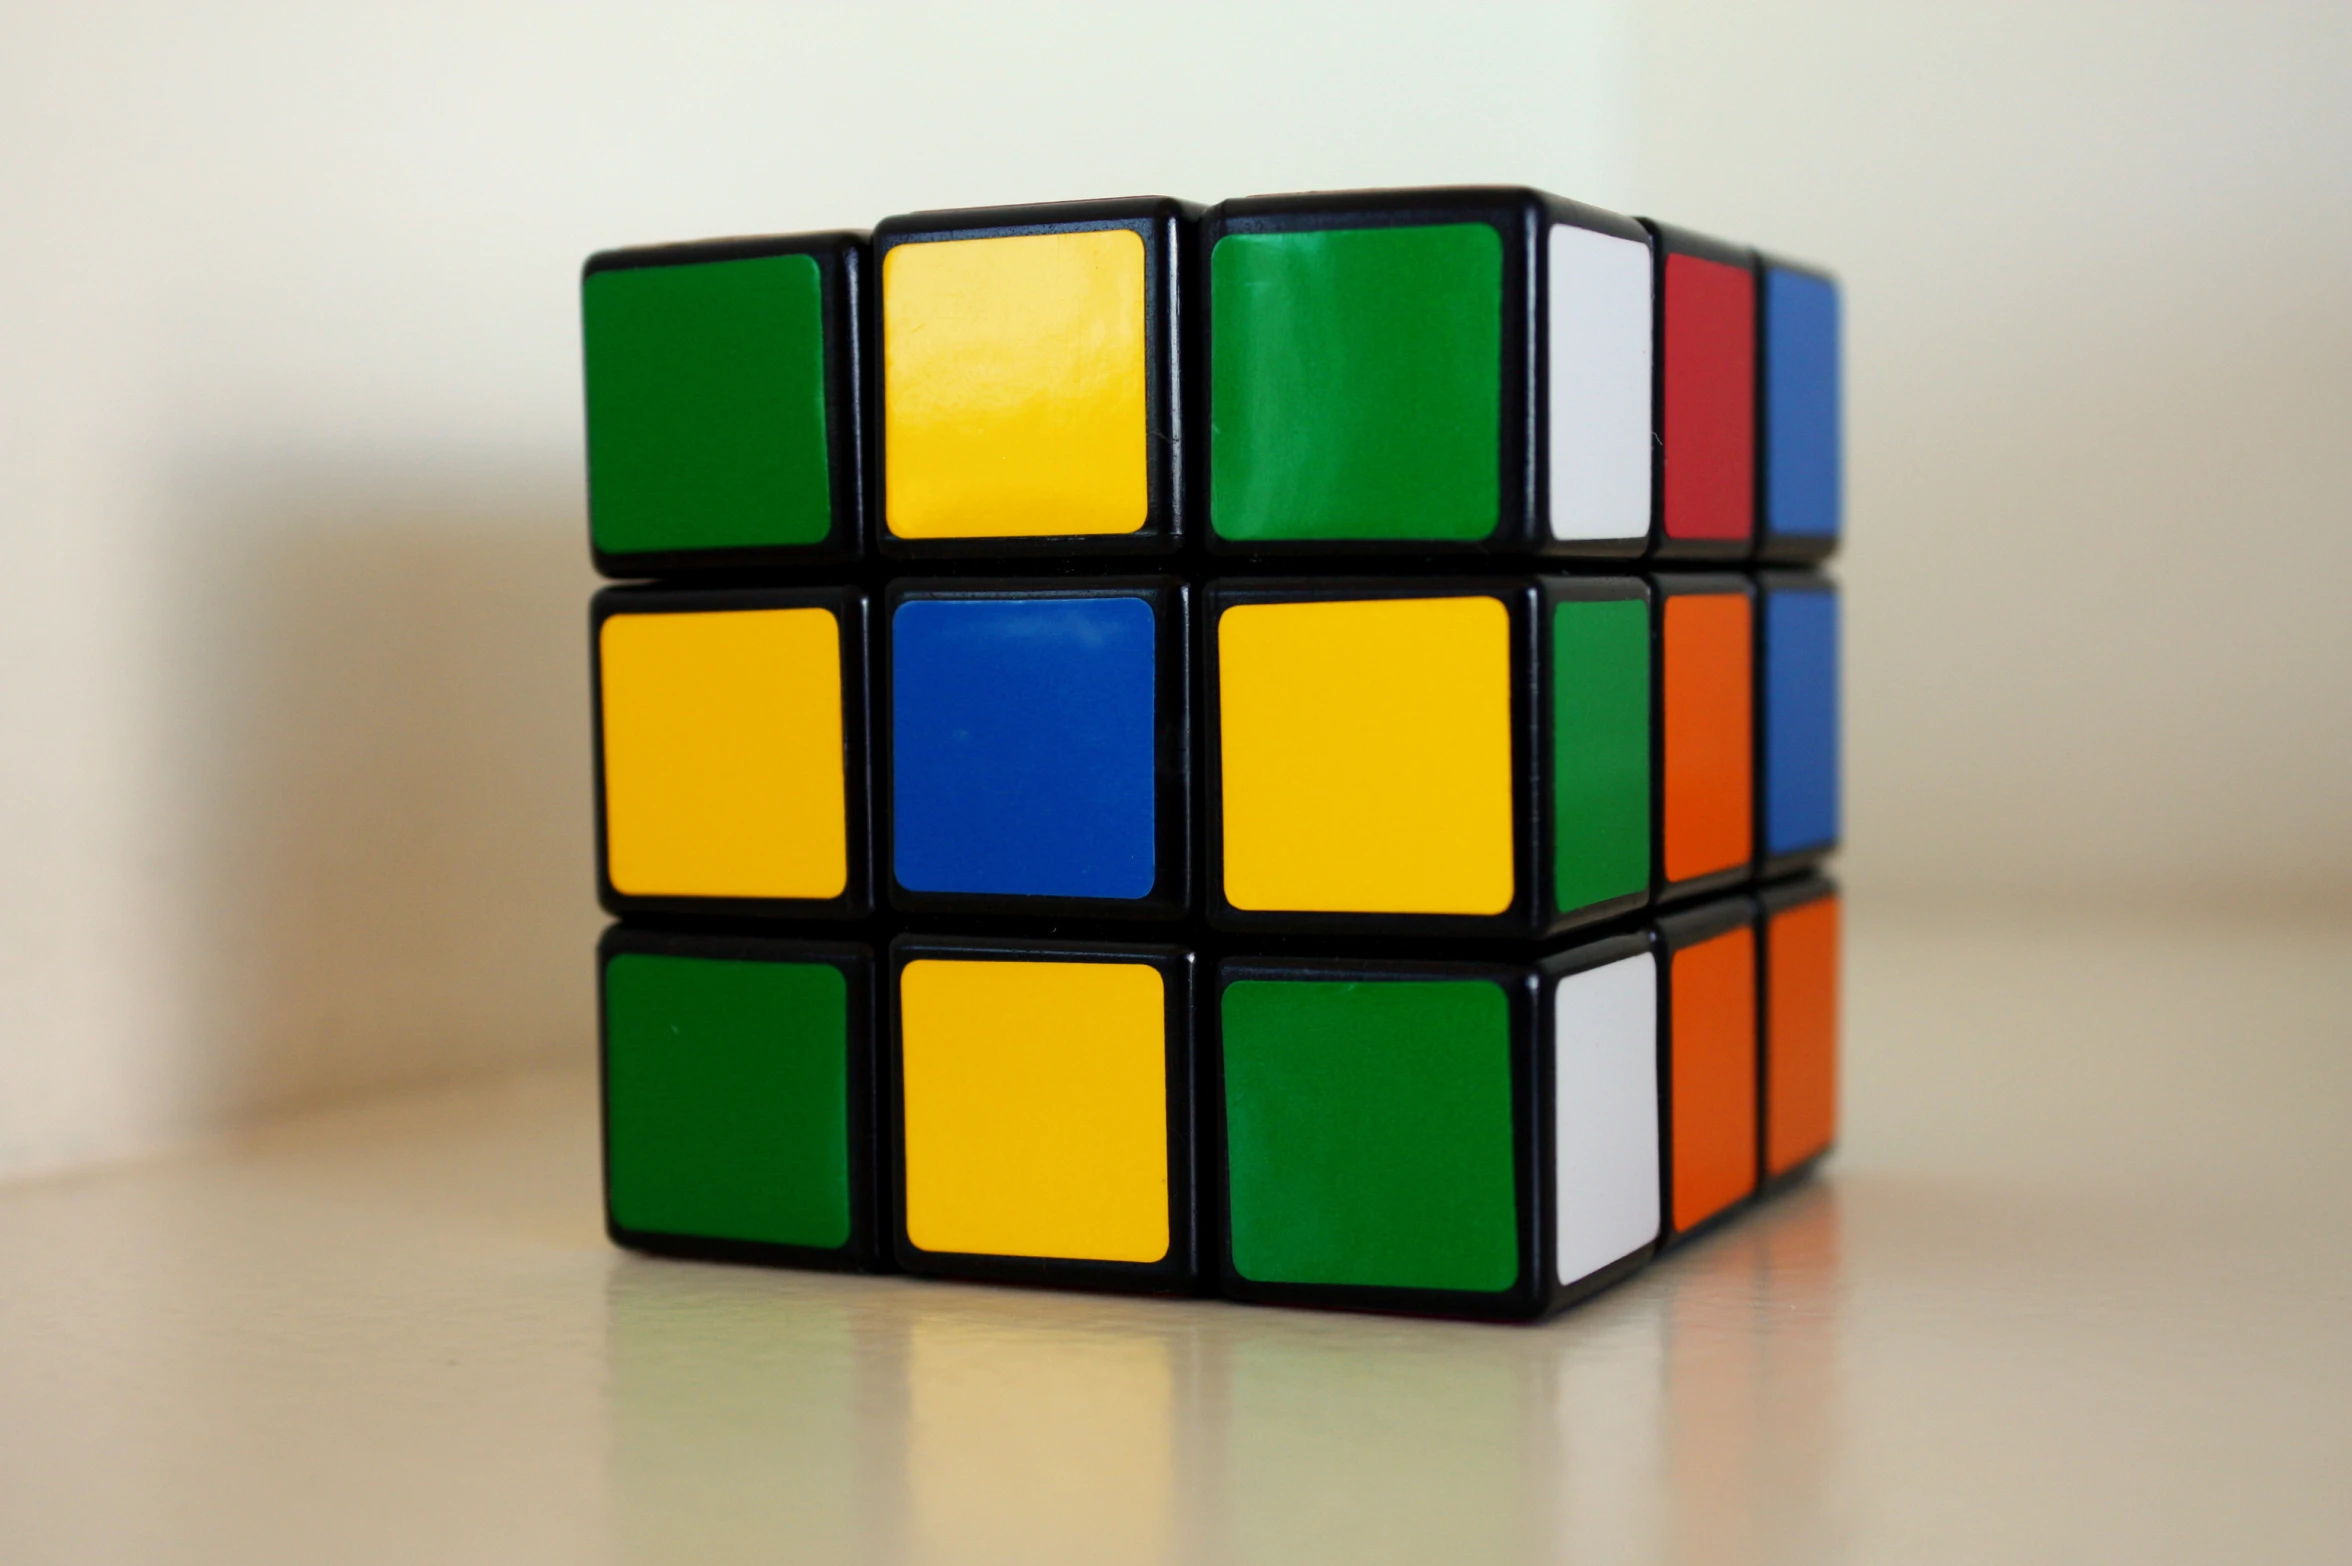 there is a rubik that is multicolored